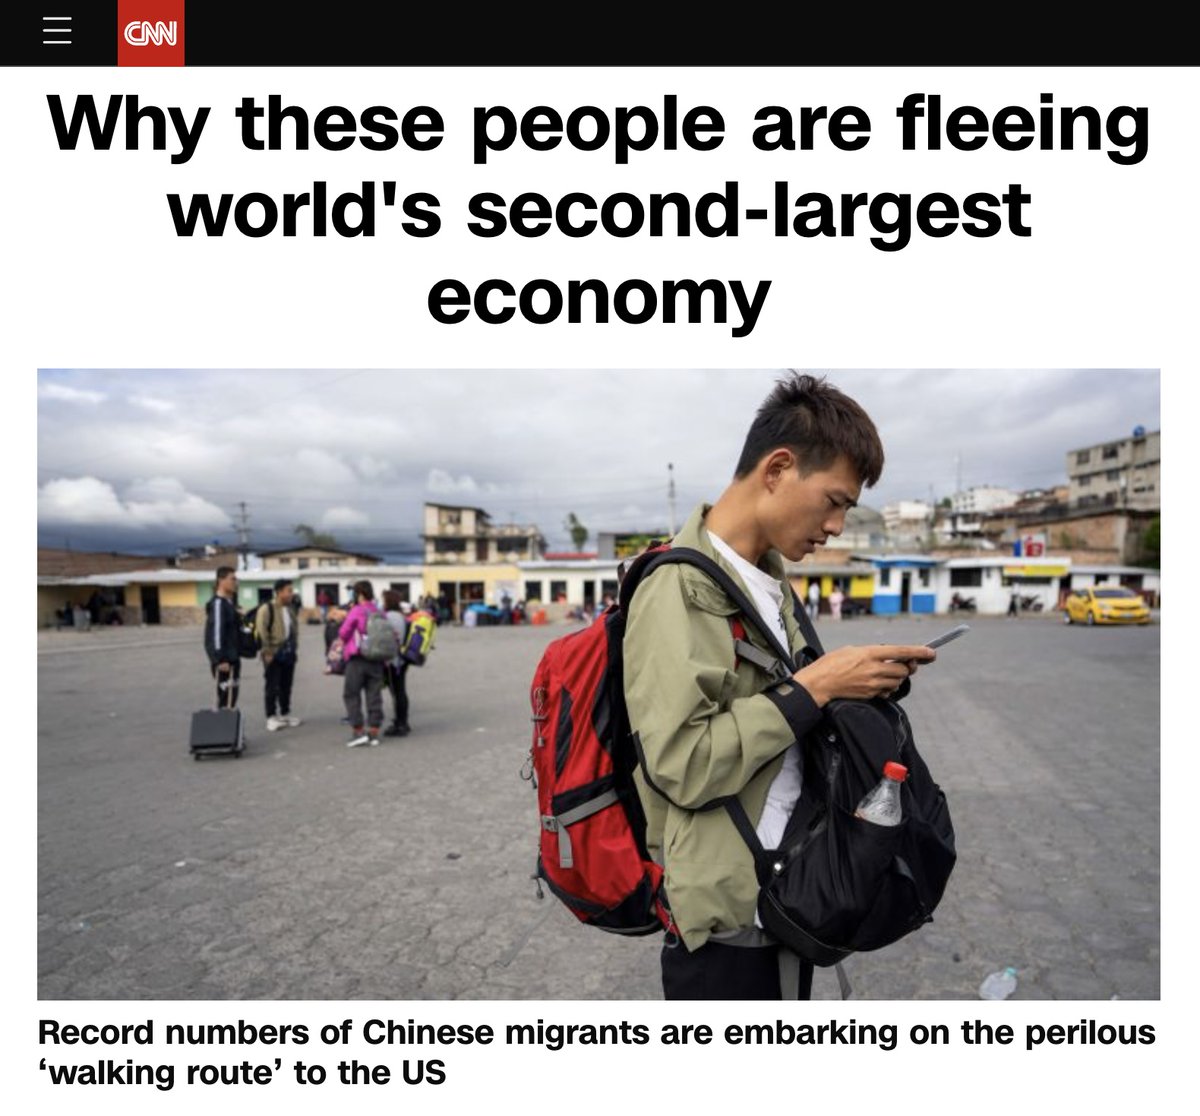 We just published a report documenting the unprecedented number of Chinese migrants fleeing China for the US in the past year via the perilous journey in LatAm countries, which is often called 'Walking Route'#走线 @David_Culver @simonelmc @CNN Read on CNN: bit.ly/3NW4uqp